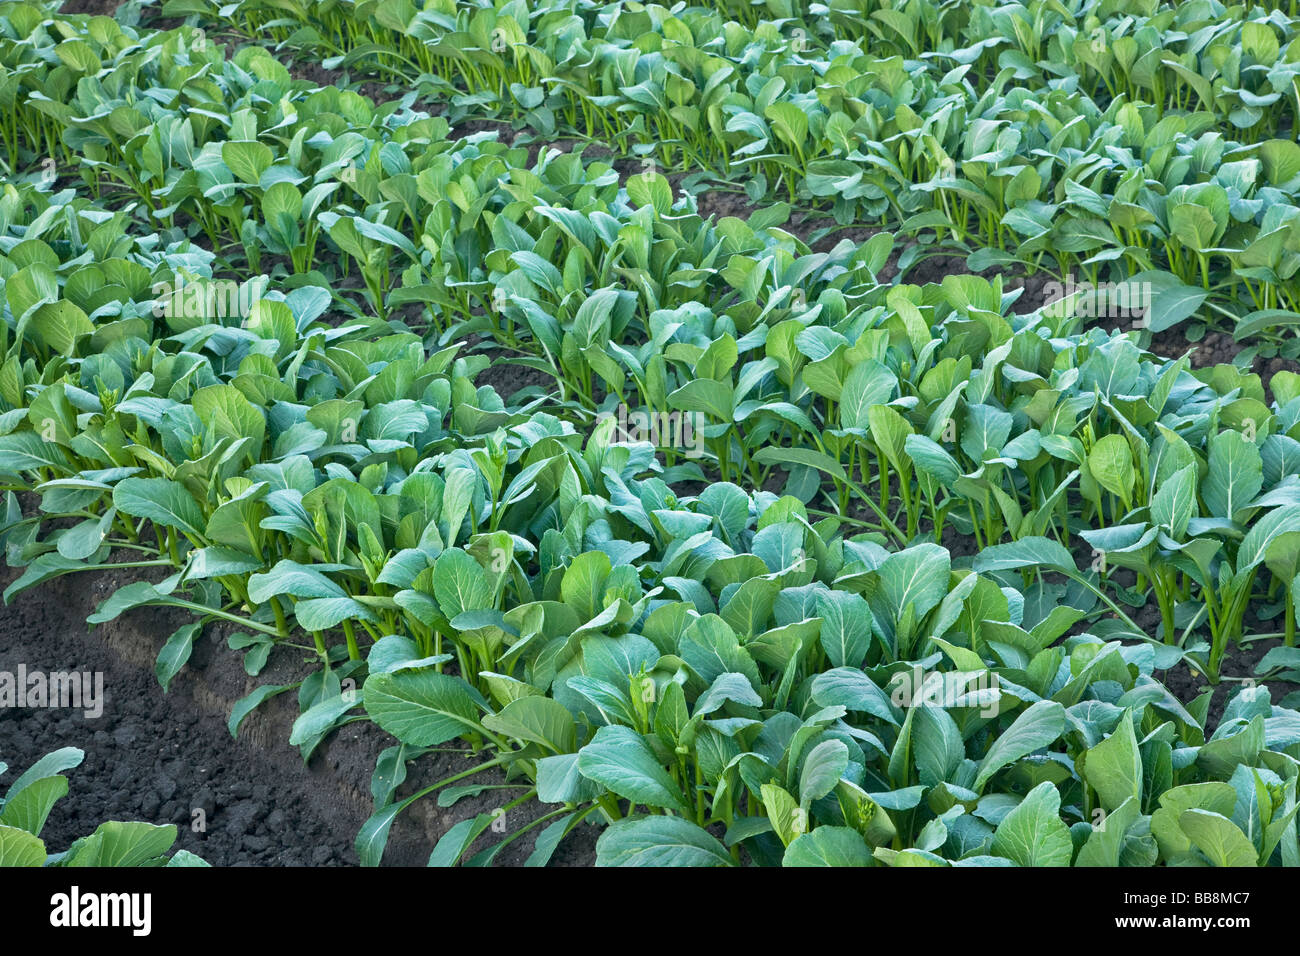 Yu Choy Sum, rows of Chinese Vegetable. Stock Photo